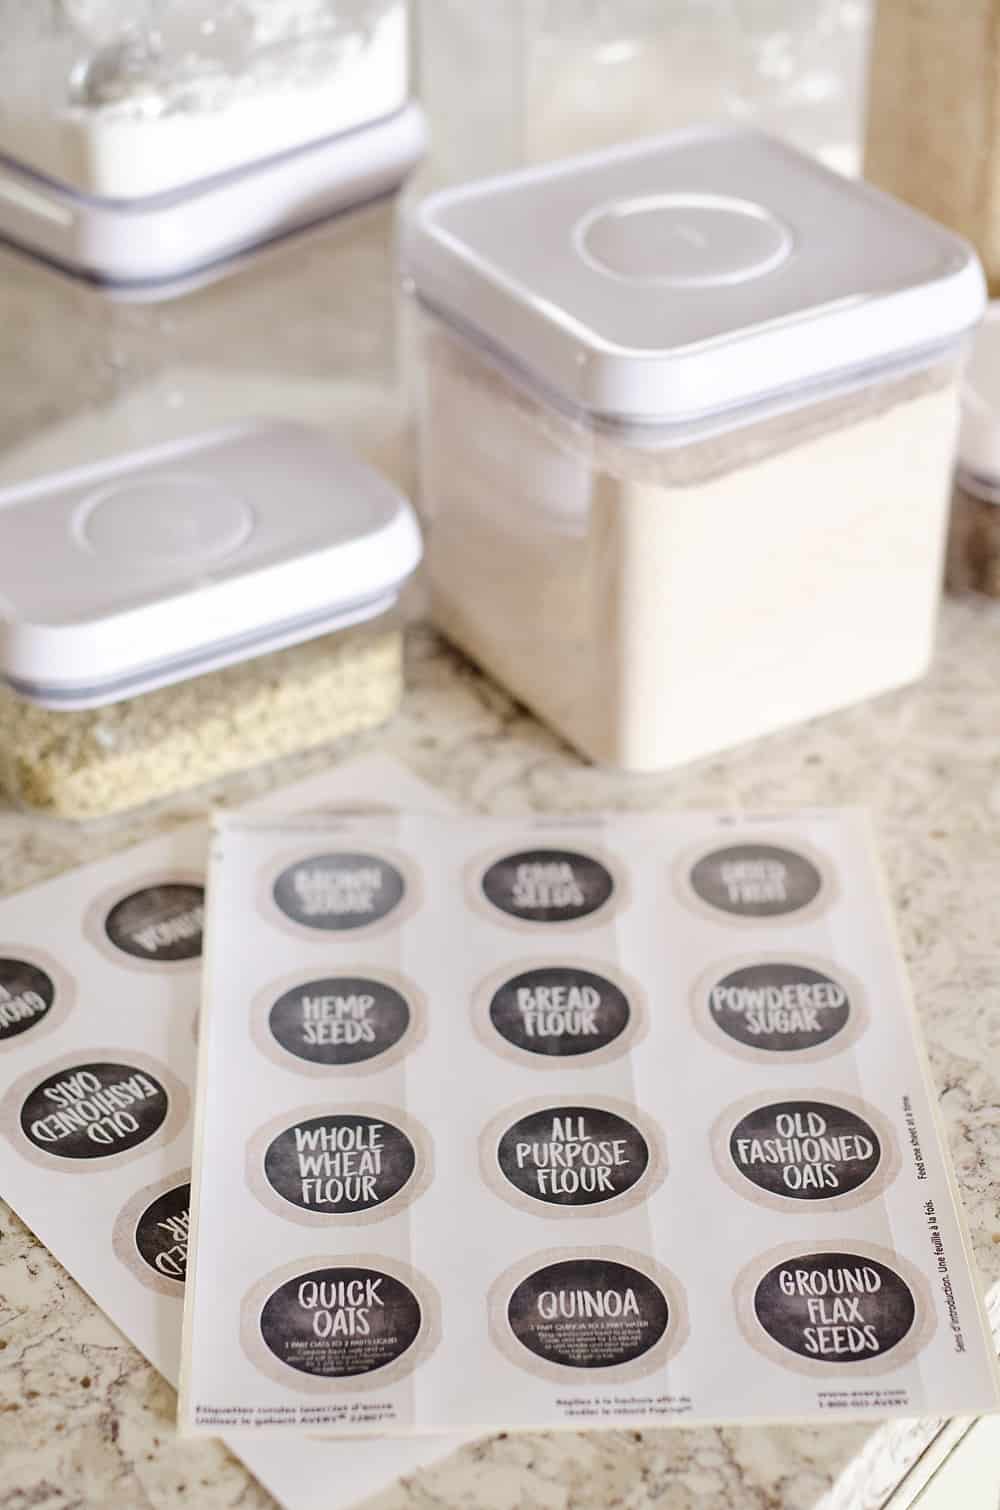 Kitchen Pantry Organization+ Free Printable Labels are the perfect way to bring some cleanliness and order to your home! These easy to print labels can be used with baskets, containers, shelves or anything else that needs some organizing. 